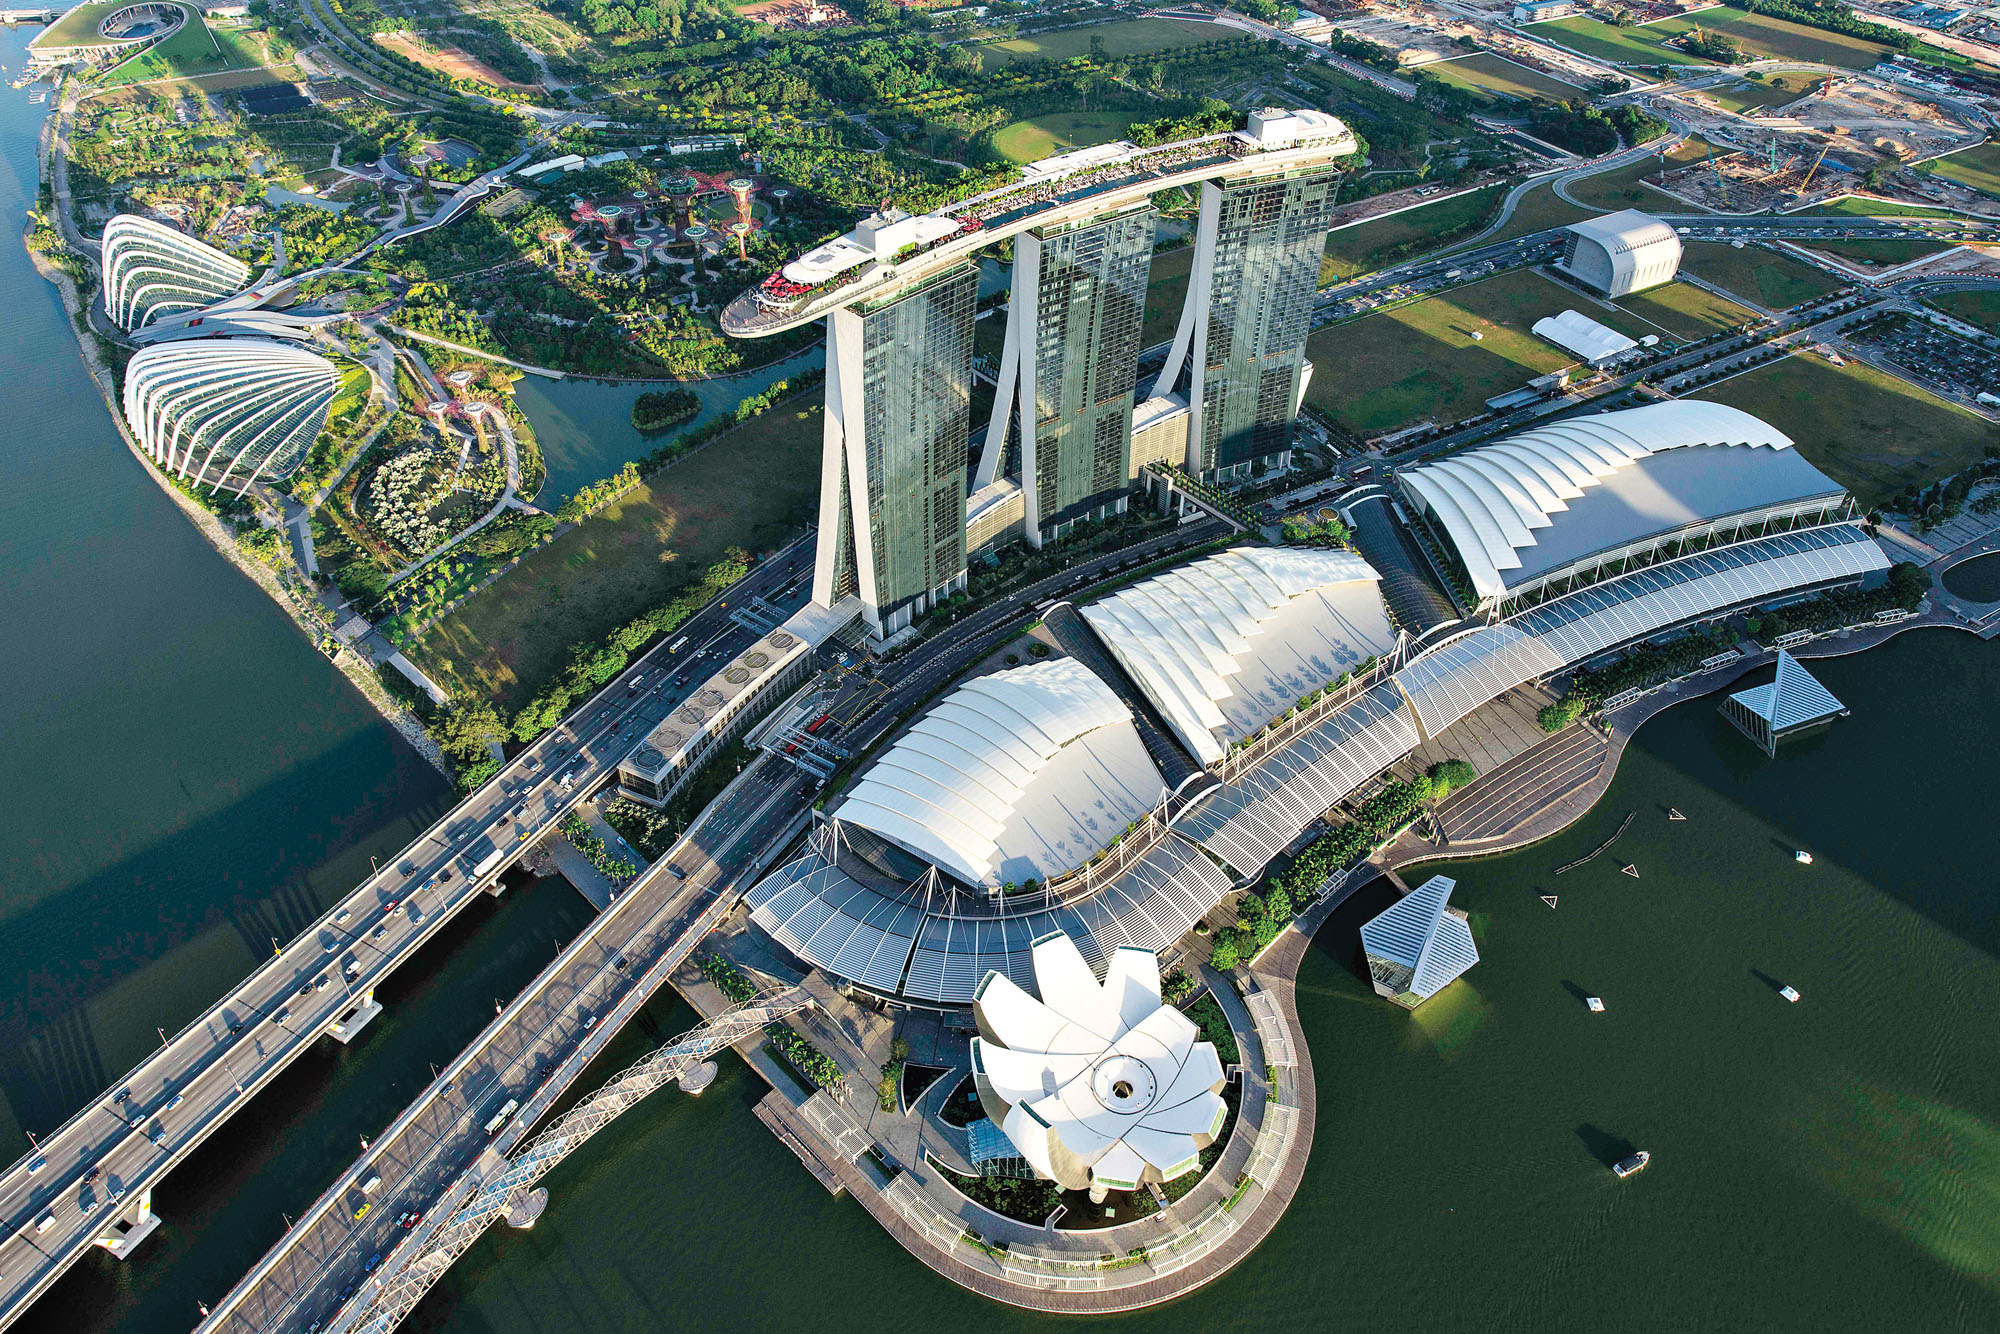 An aerial photograph of the Marina Bay Sands hotel and skypark designed by Moshe Safdie in Singapore that depicts lush gardens on the roof